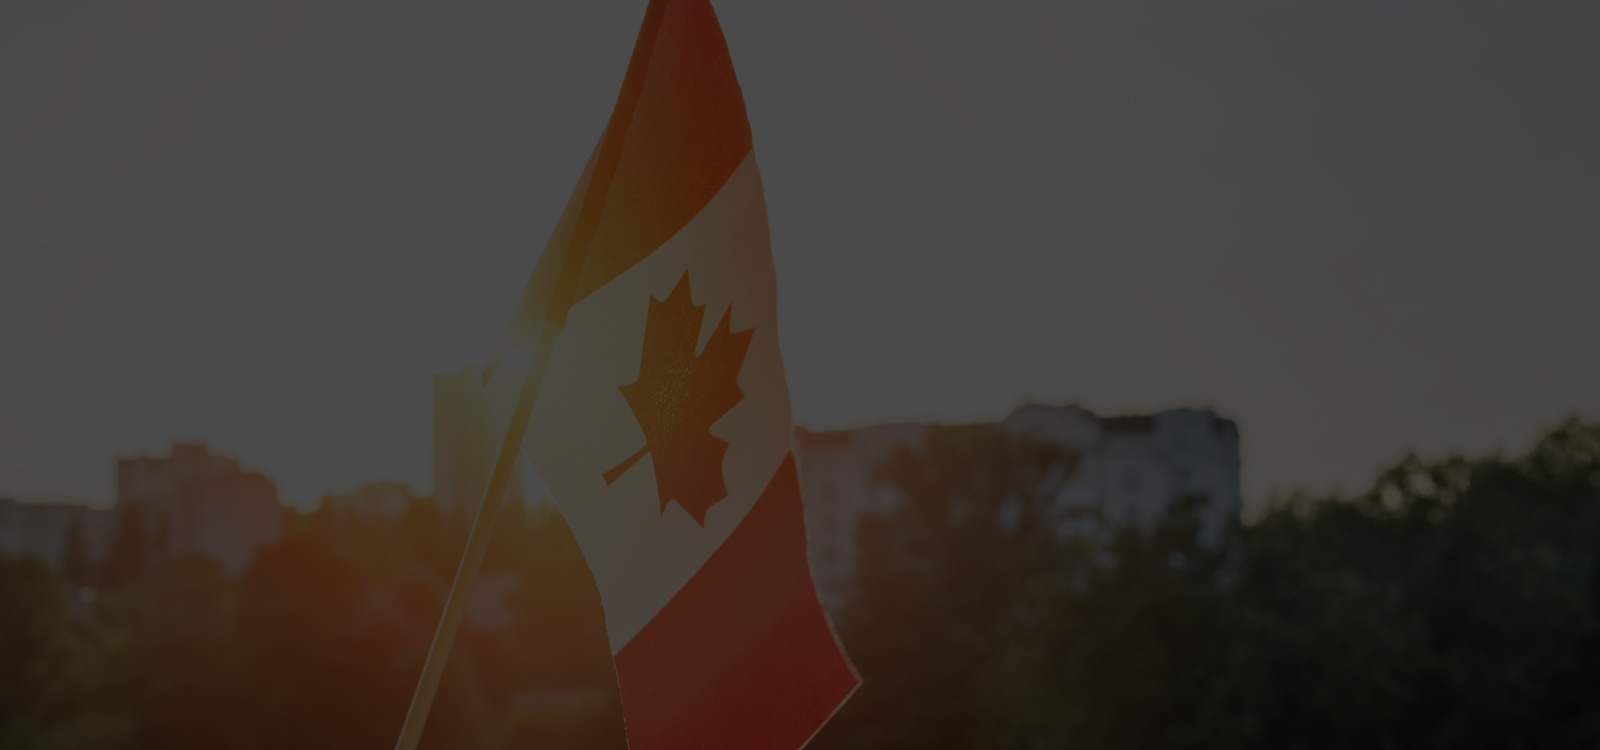 Our opportunity: Realizing Canada’s potential In the global digital economy